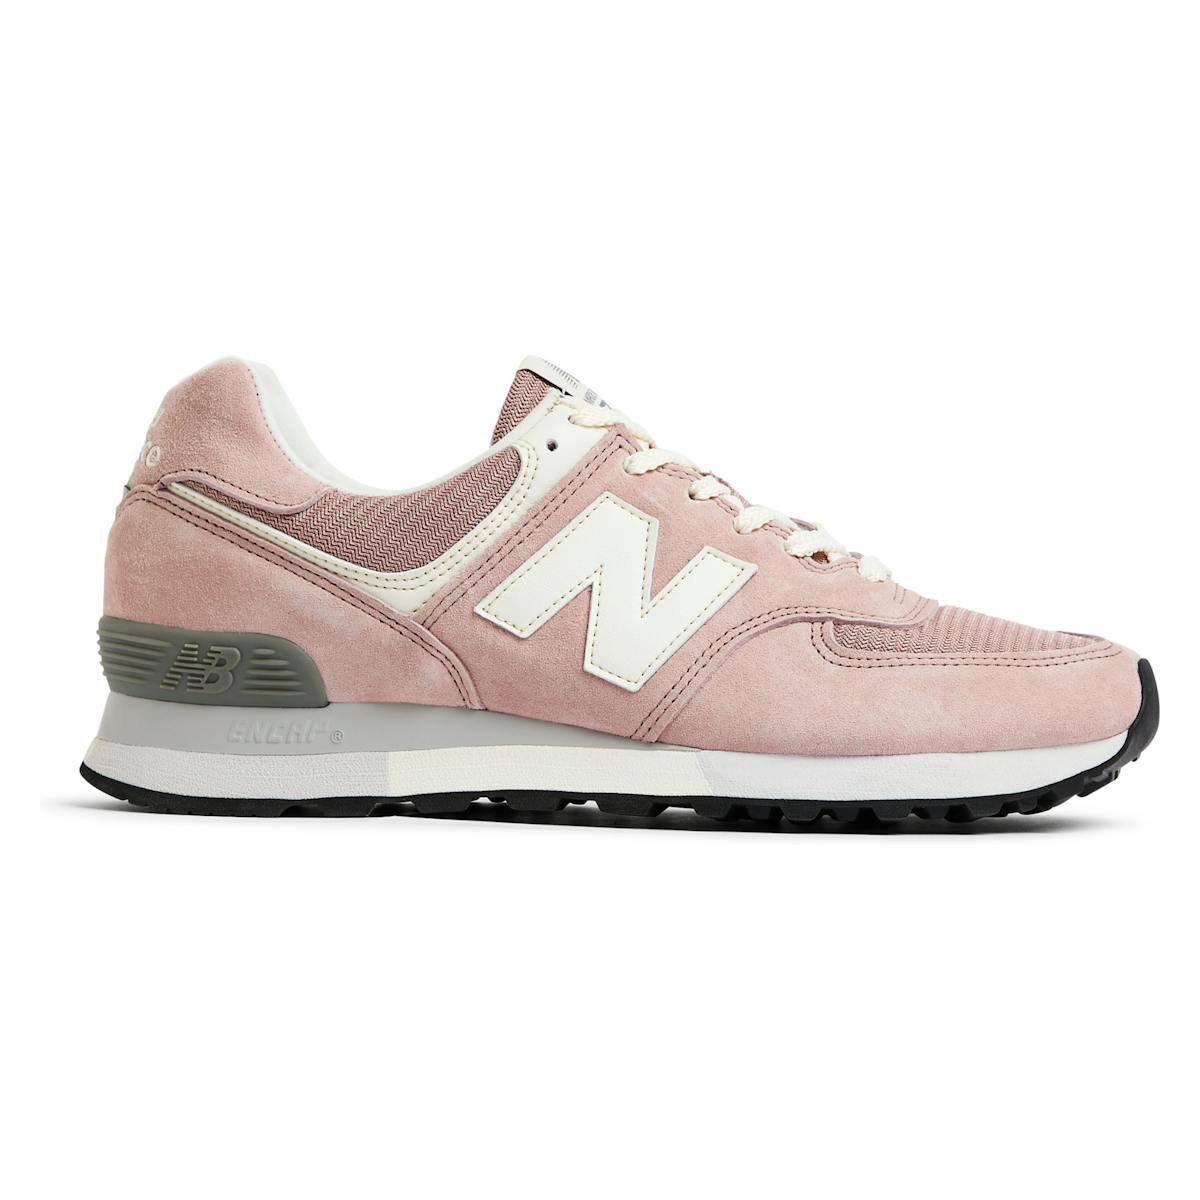 New Balance MADE in UK 576